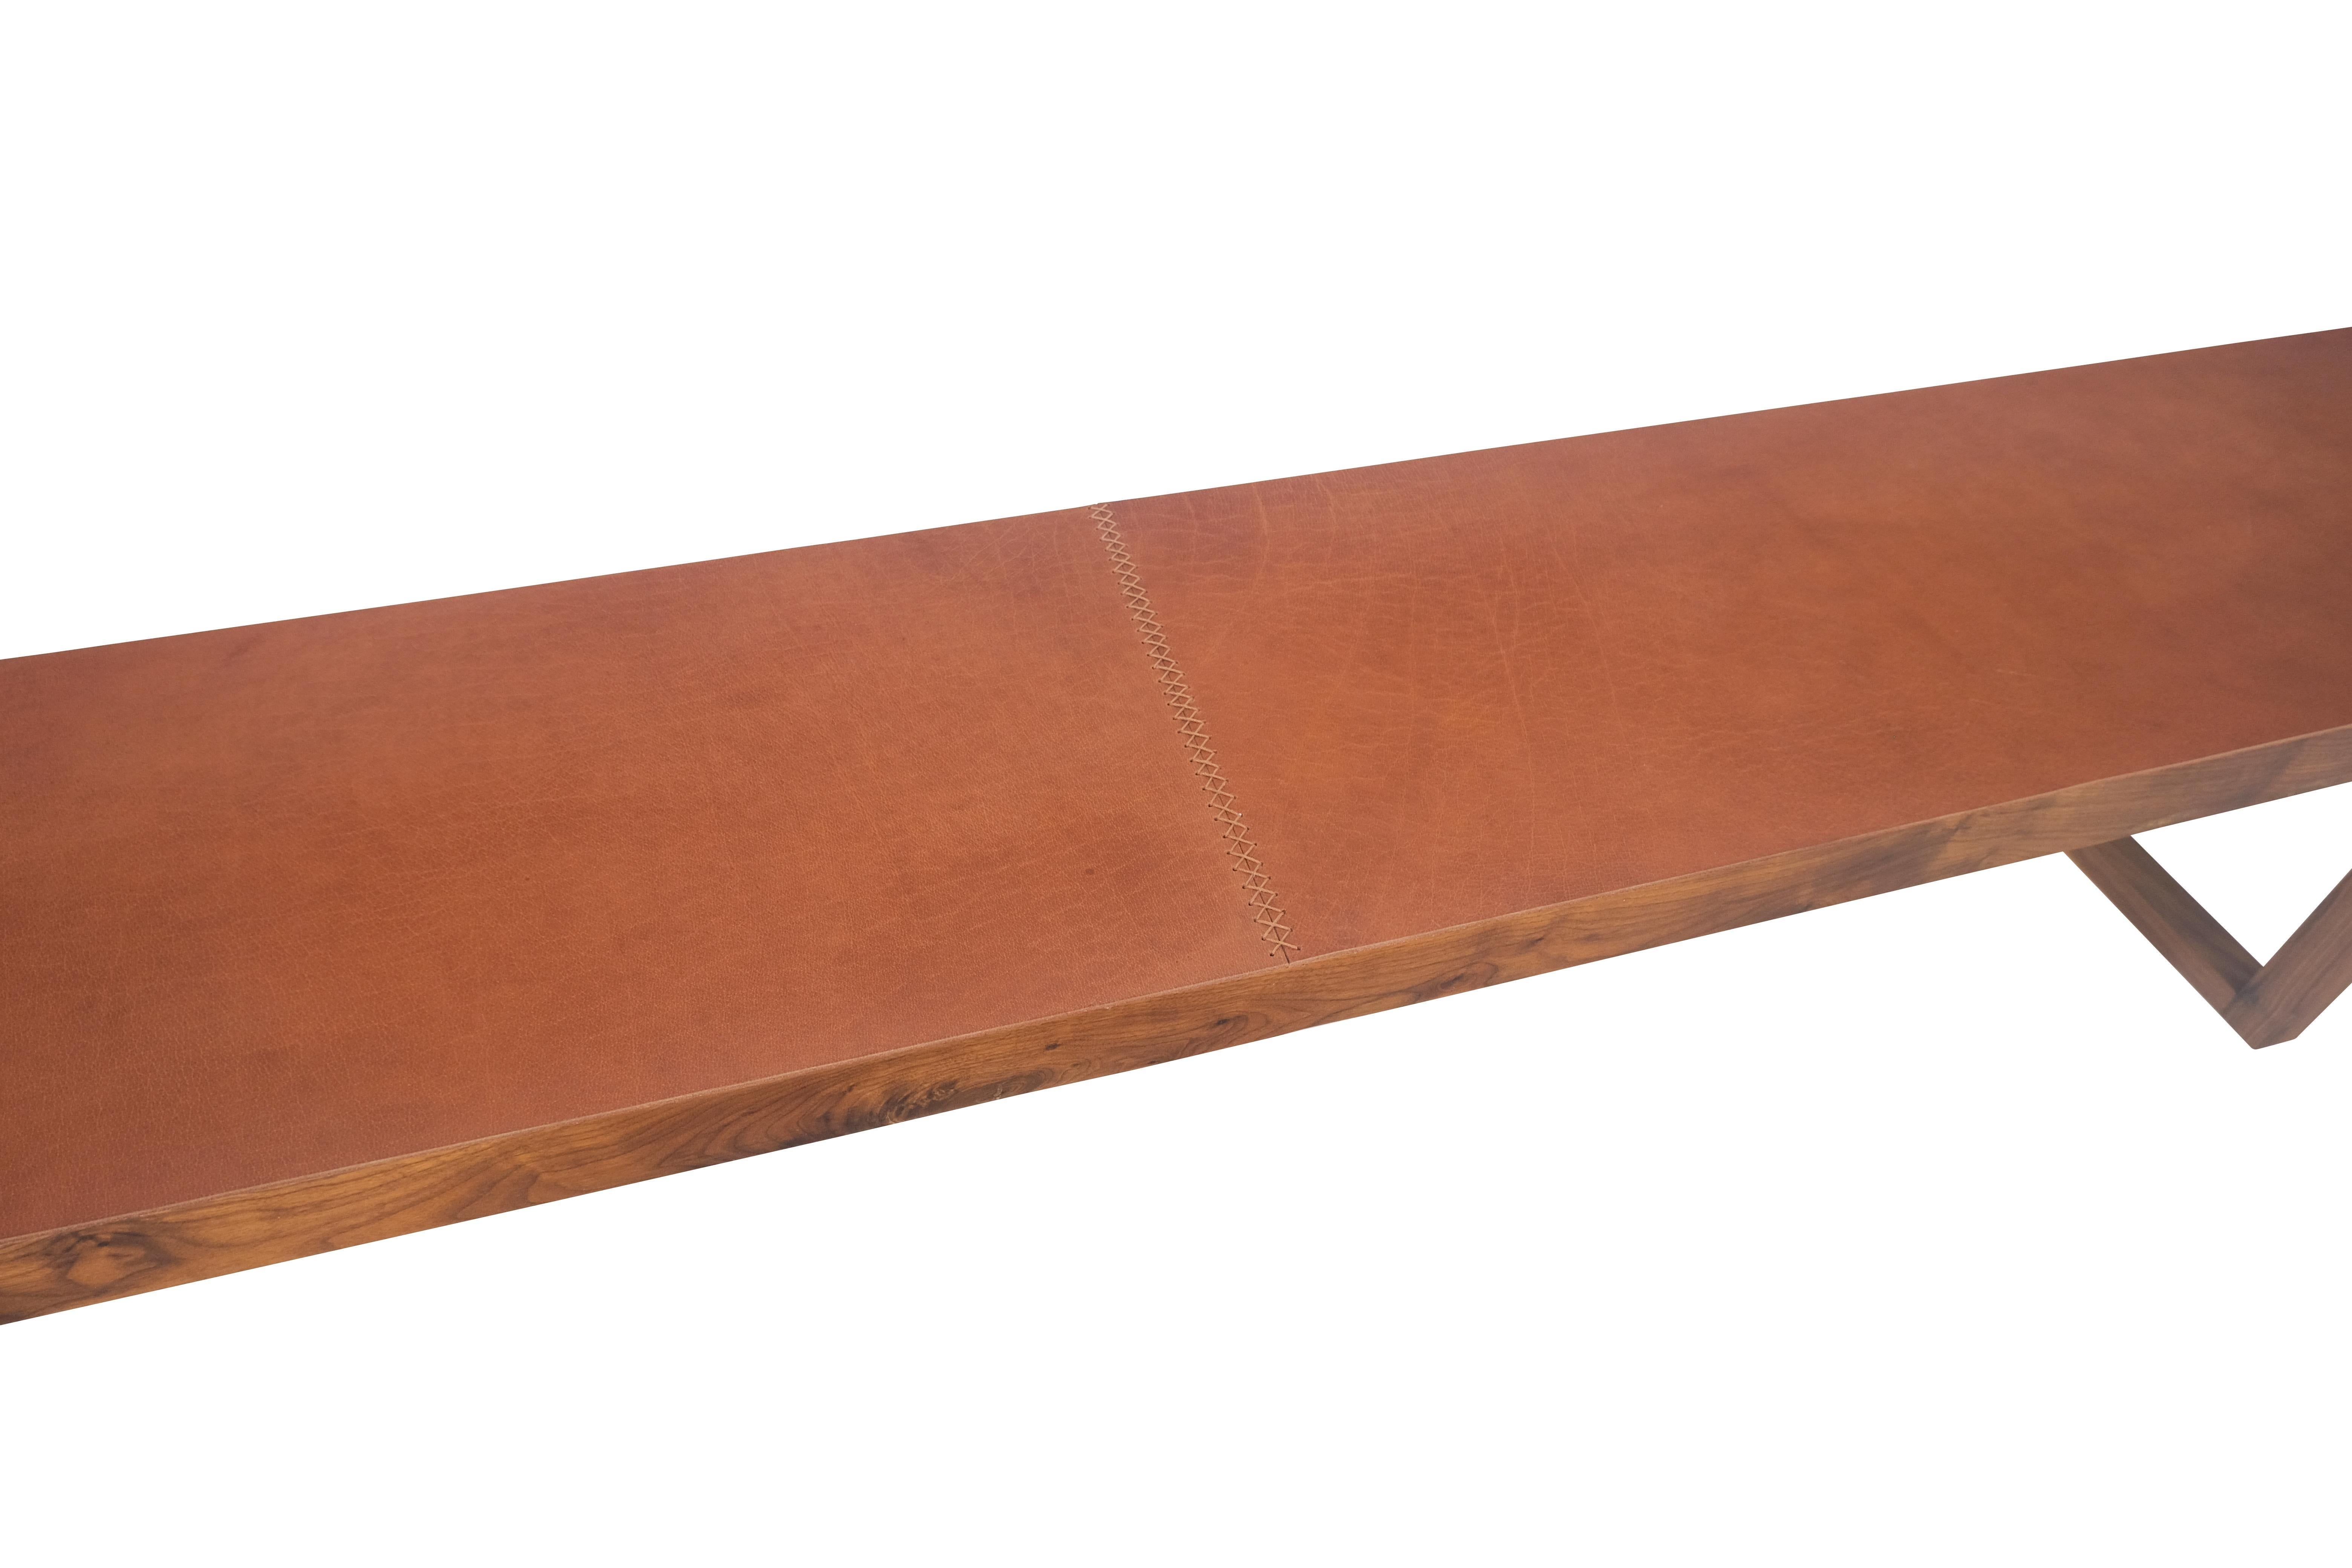 Slim Profile Solid Walnut Frame Integrated leather Cushion 7.5' Long Bench For Sale 2